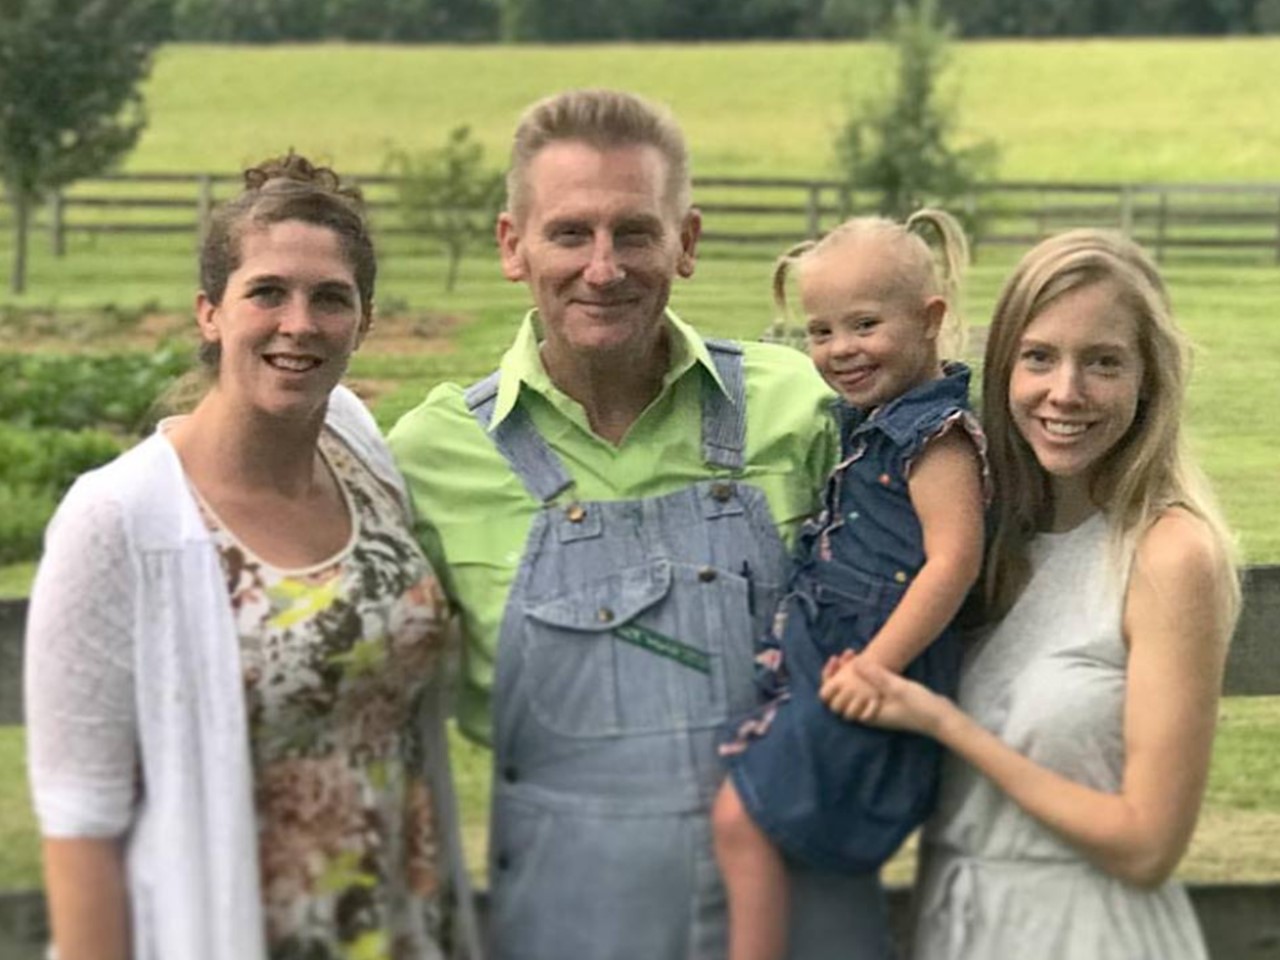 Rory Feek to Perform Again for Great Cause The Music Health Alliance